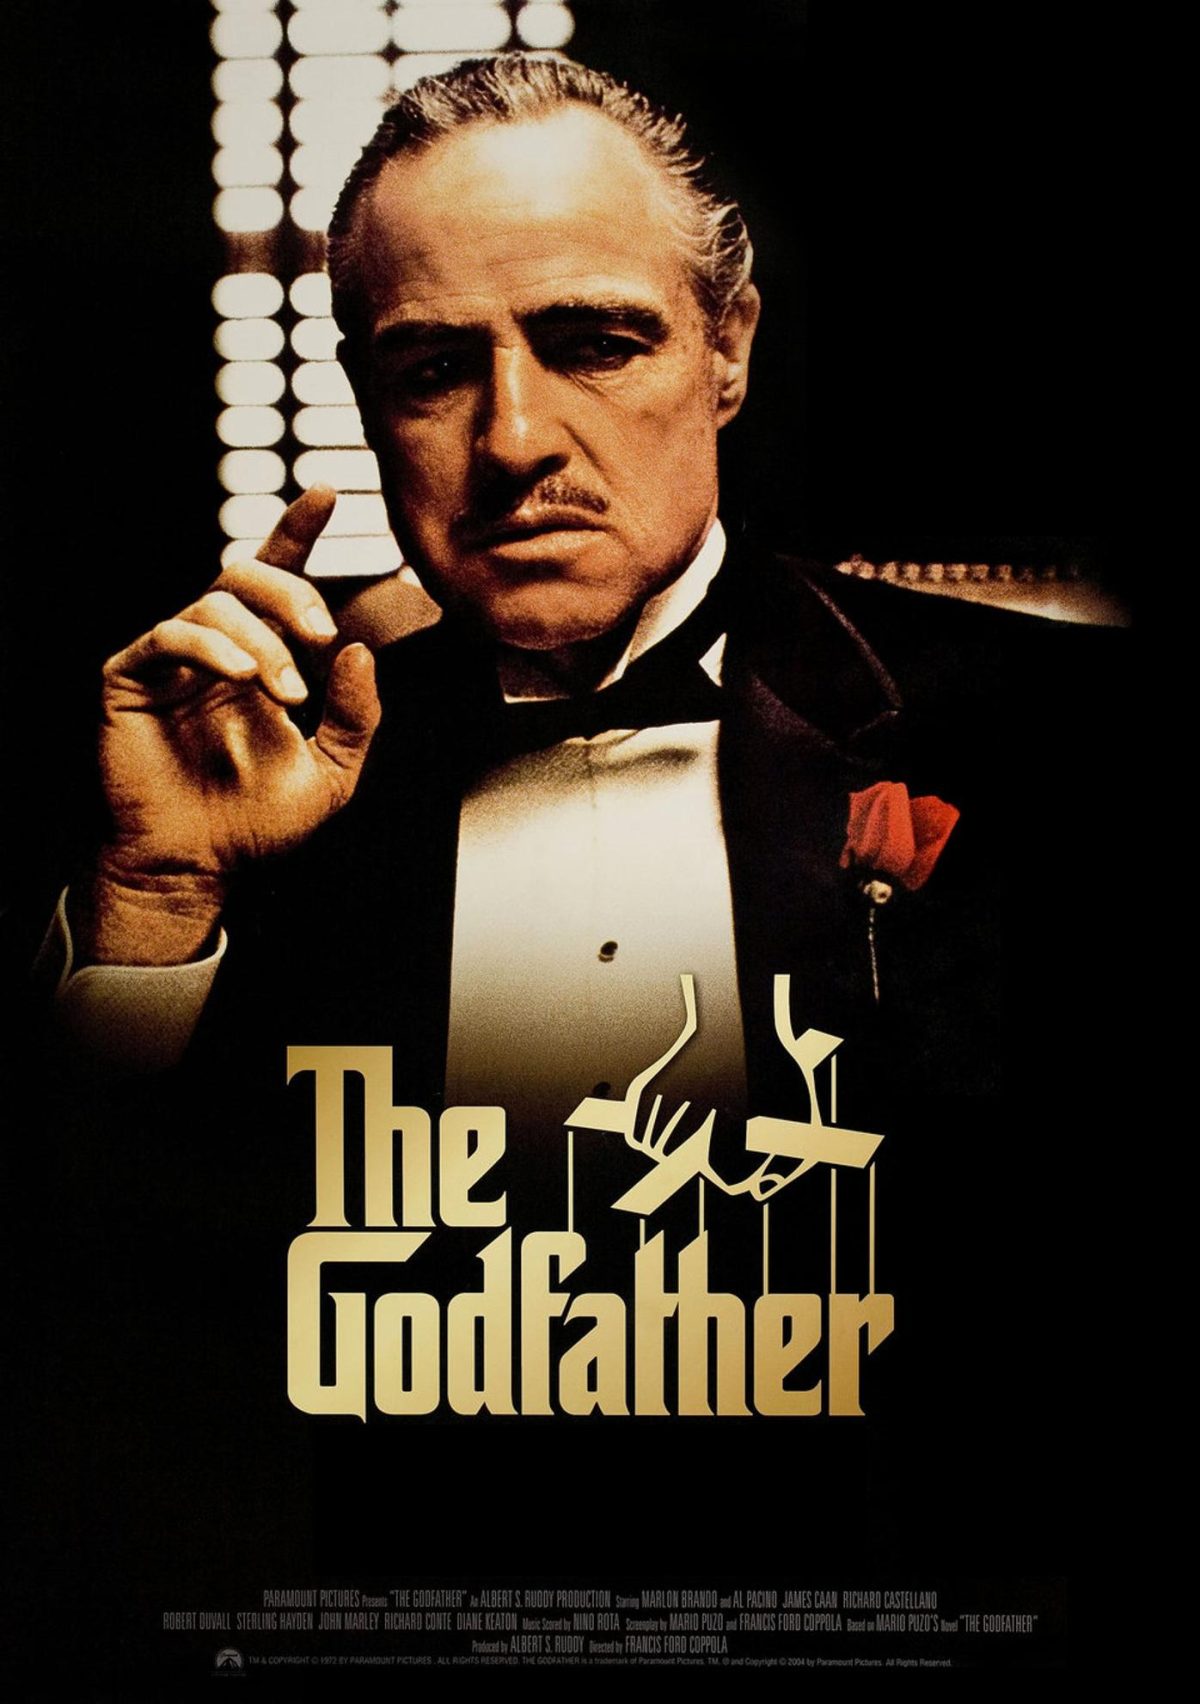 Live The Life With Dogfather – A Treat For Godfather Fans